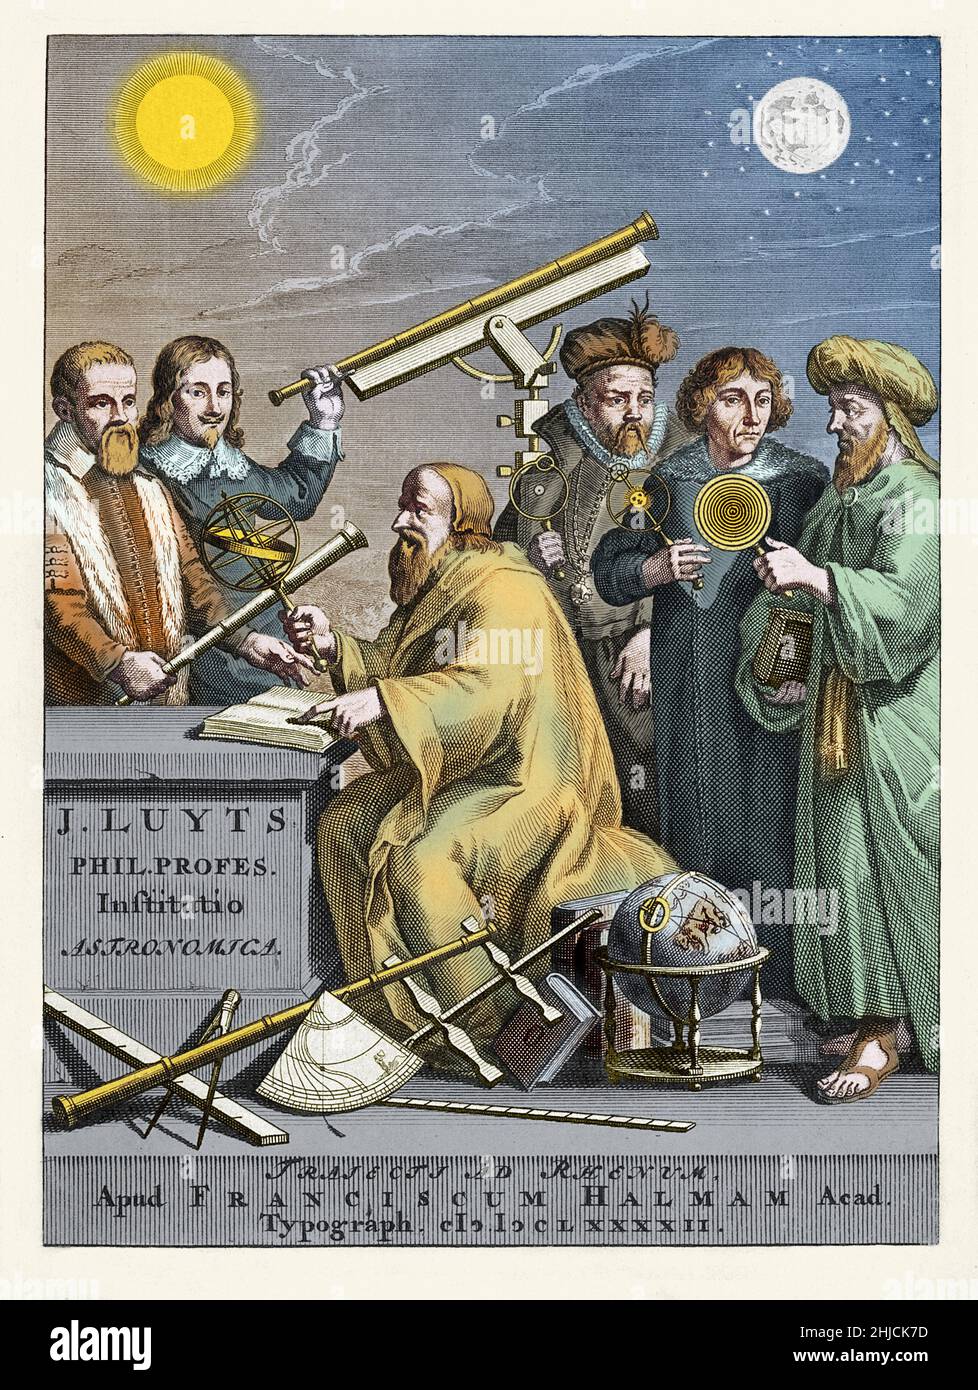 Famous astronomers in history, a colorization of a frontispiece engraving from Jan Luyts‚Äô Astronomica Institutio, 1692. The figure at center may be the ancient Greek astronomer Hipparchus, or a figure of Luyts himself. In background are depicted, from left to right: Galileo Galilei (1564-1642), Johannes Hevelius (1611-1687), Tycho Brahe (1546-1601), Nicolaus Copernicus (1473-1543) and Ptolemy (100-c.‚Äâ170). Frontispiece engraving by J. Mulder after G. Hoet, from Jan Luyts‚Äôs Astronomica Institutio, 1692. Stock Photo